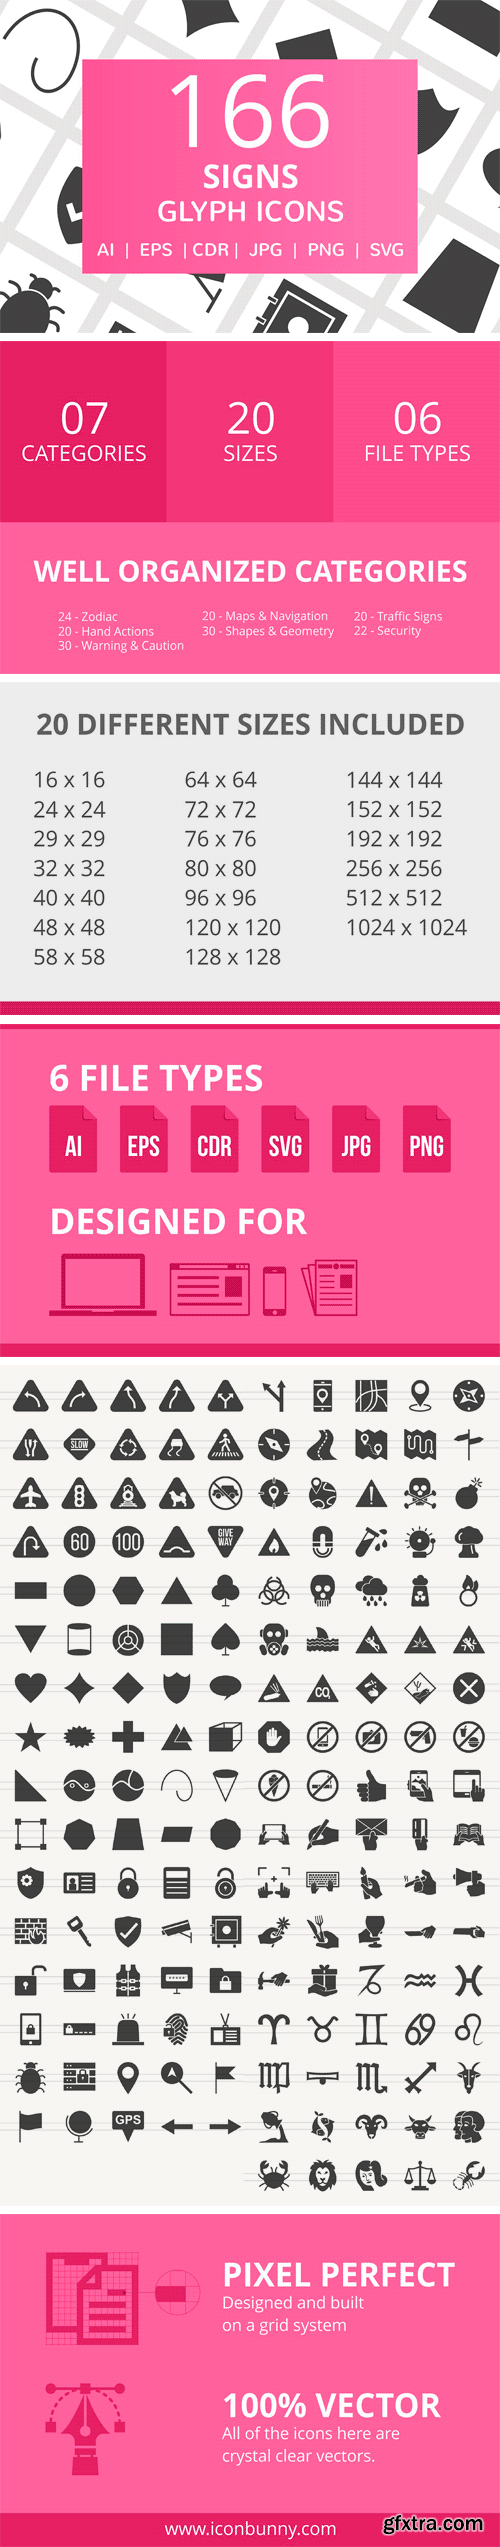 CM - 166 Signs Glyph Icons 2294009